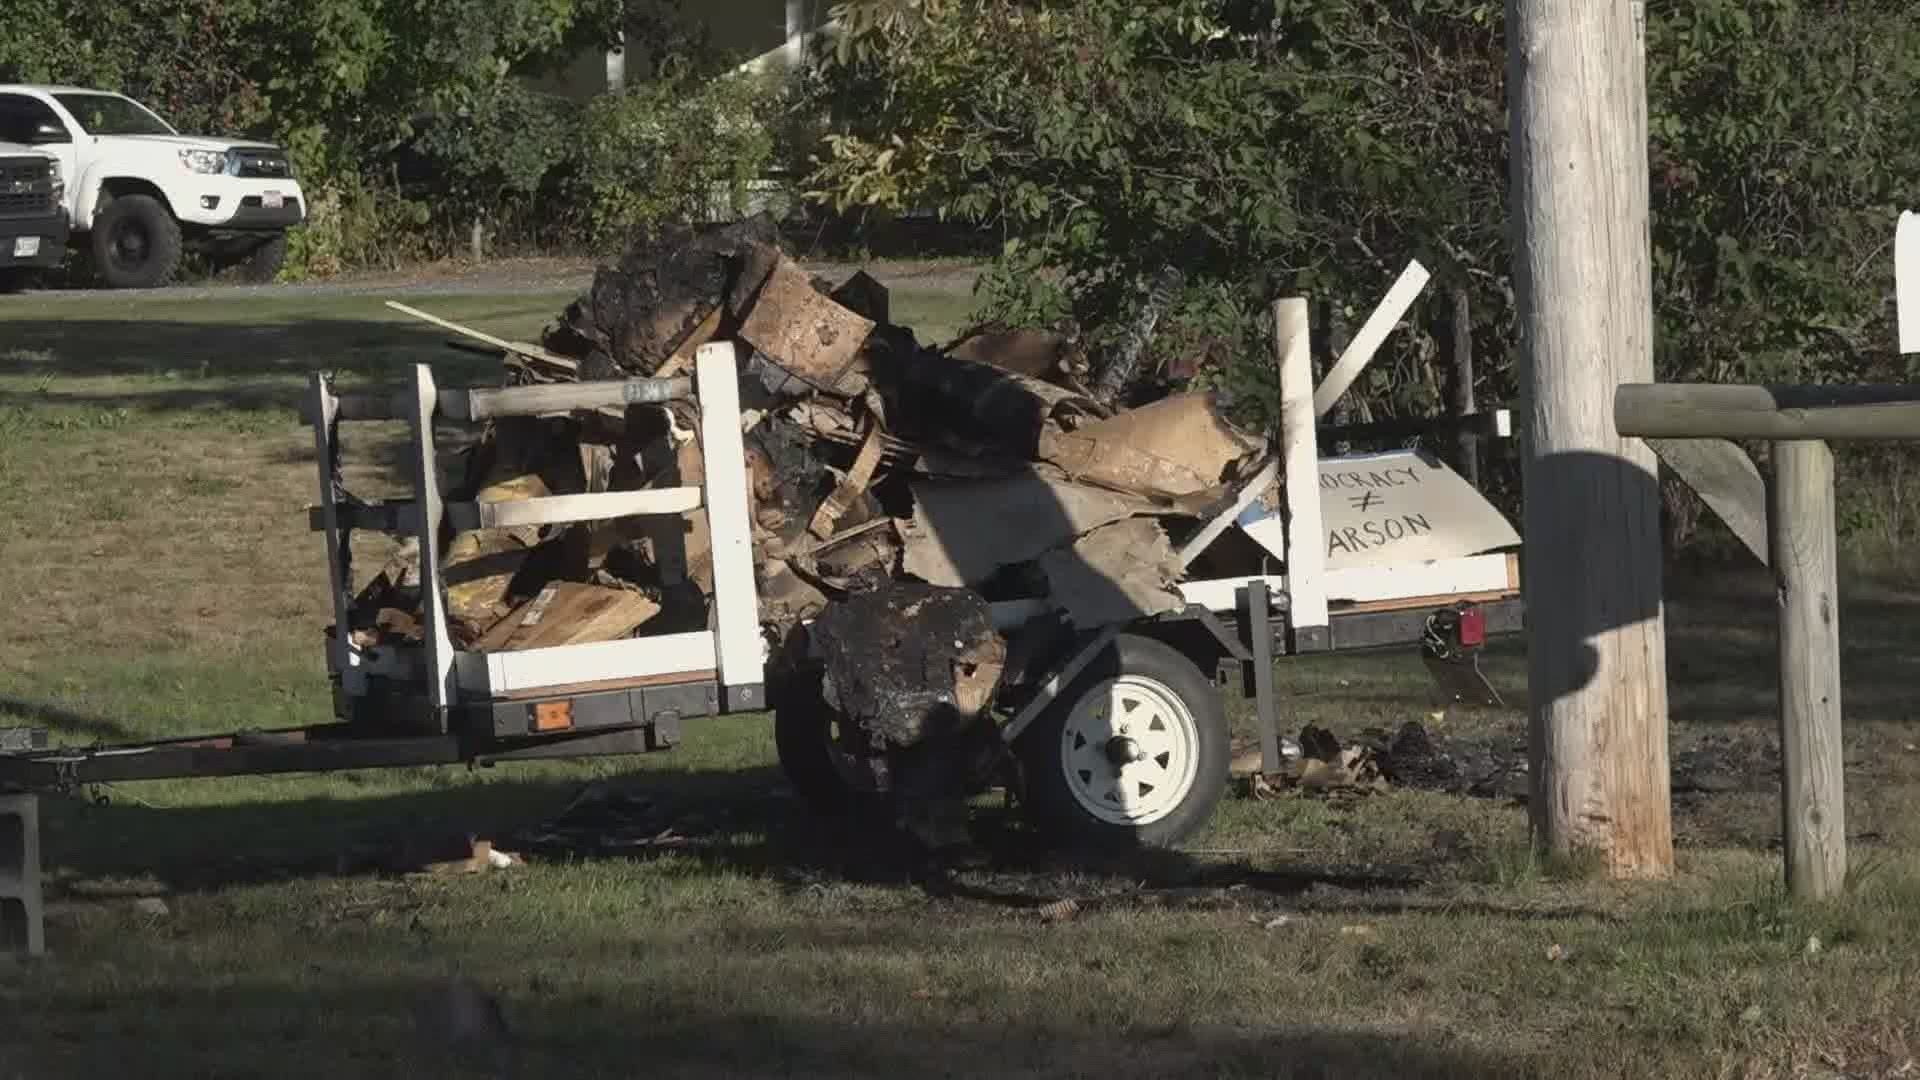 An artist's political sculpture was burned to the ground Saturday.